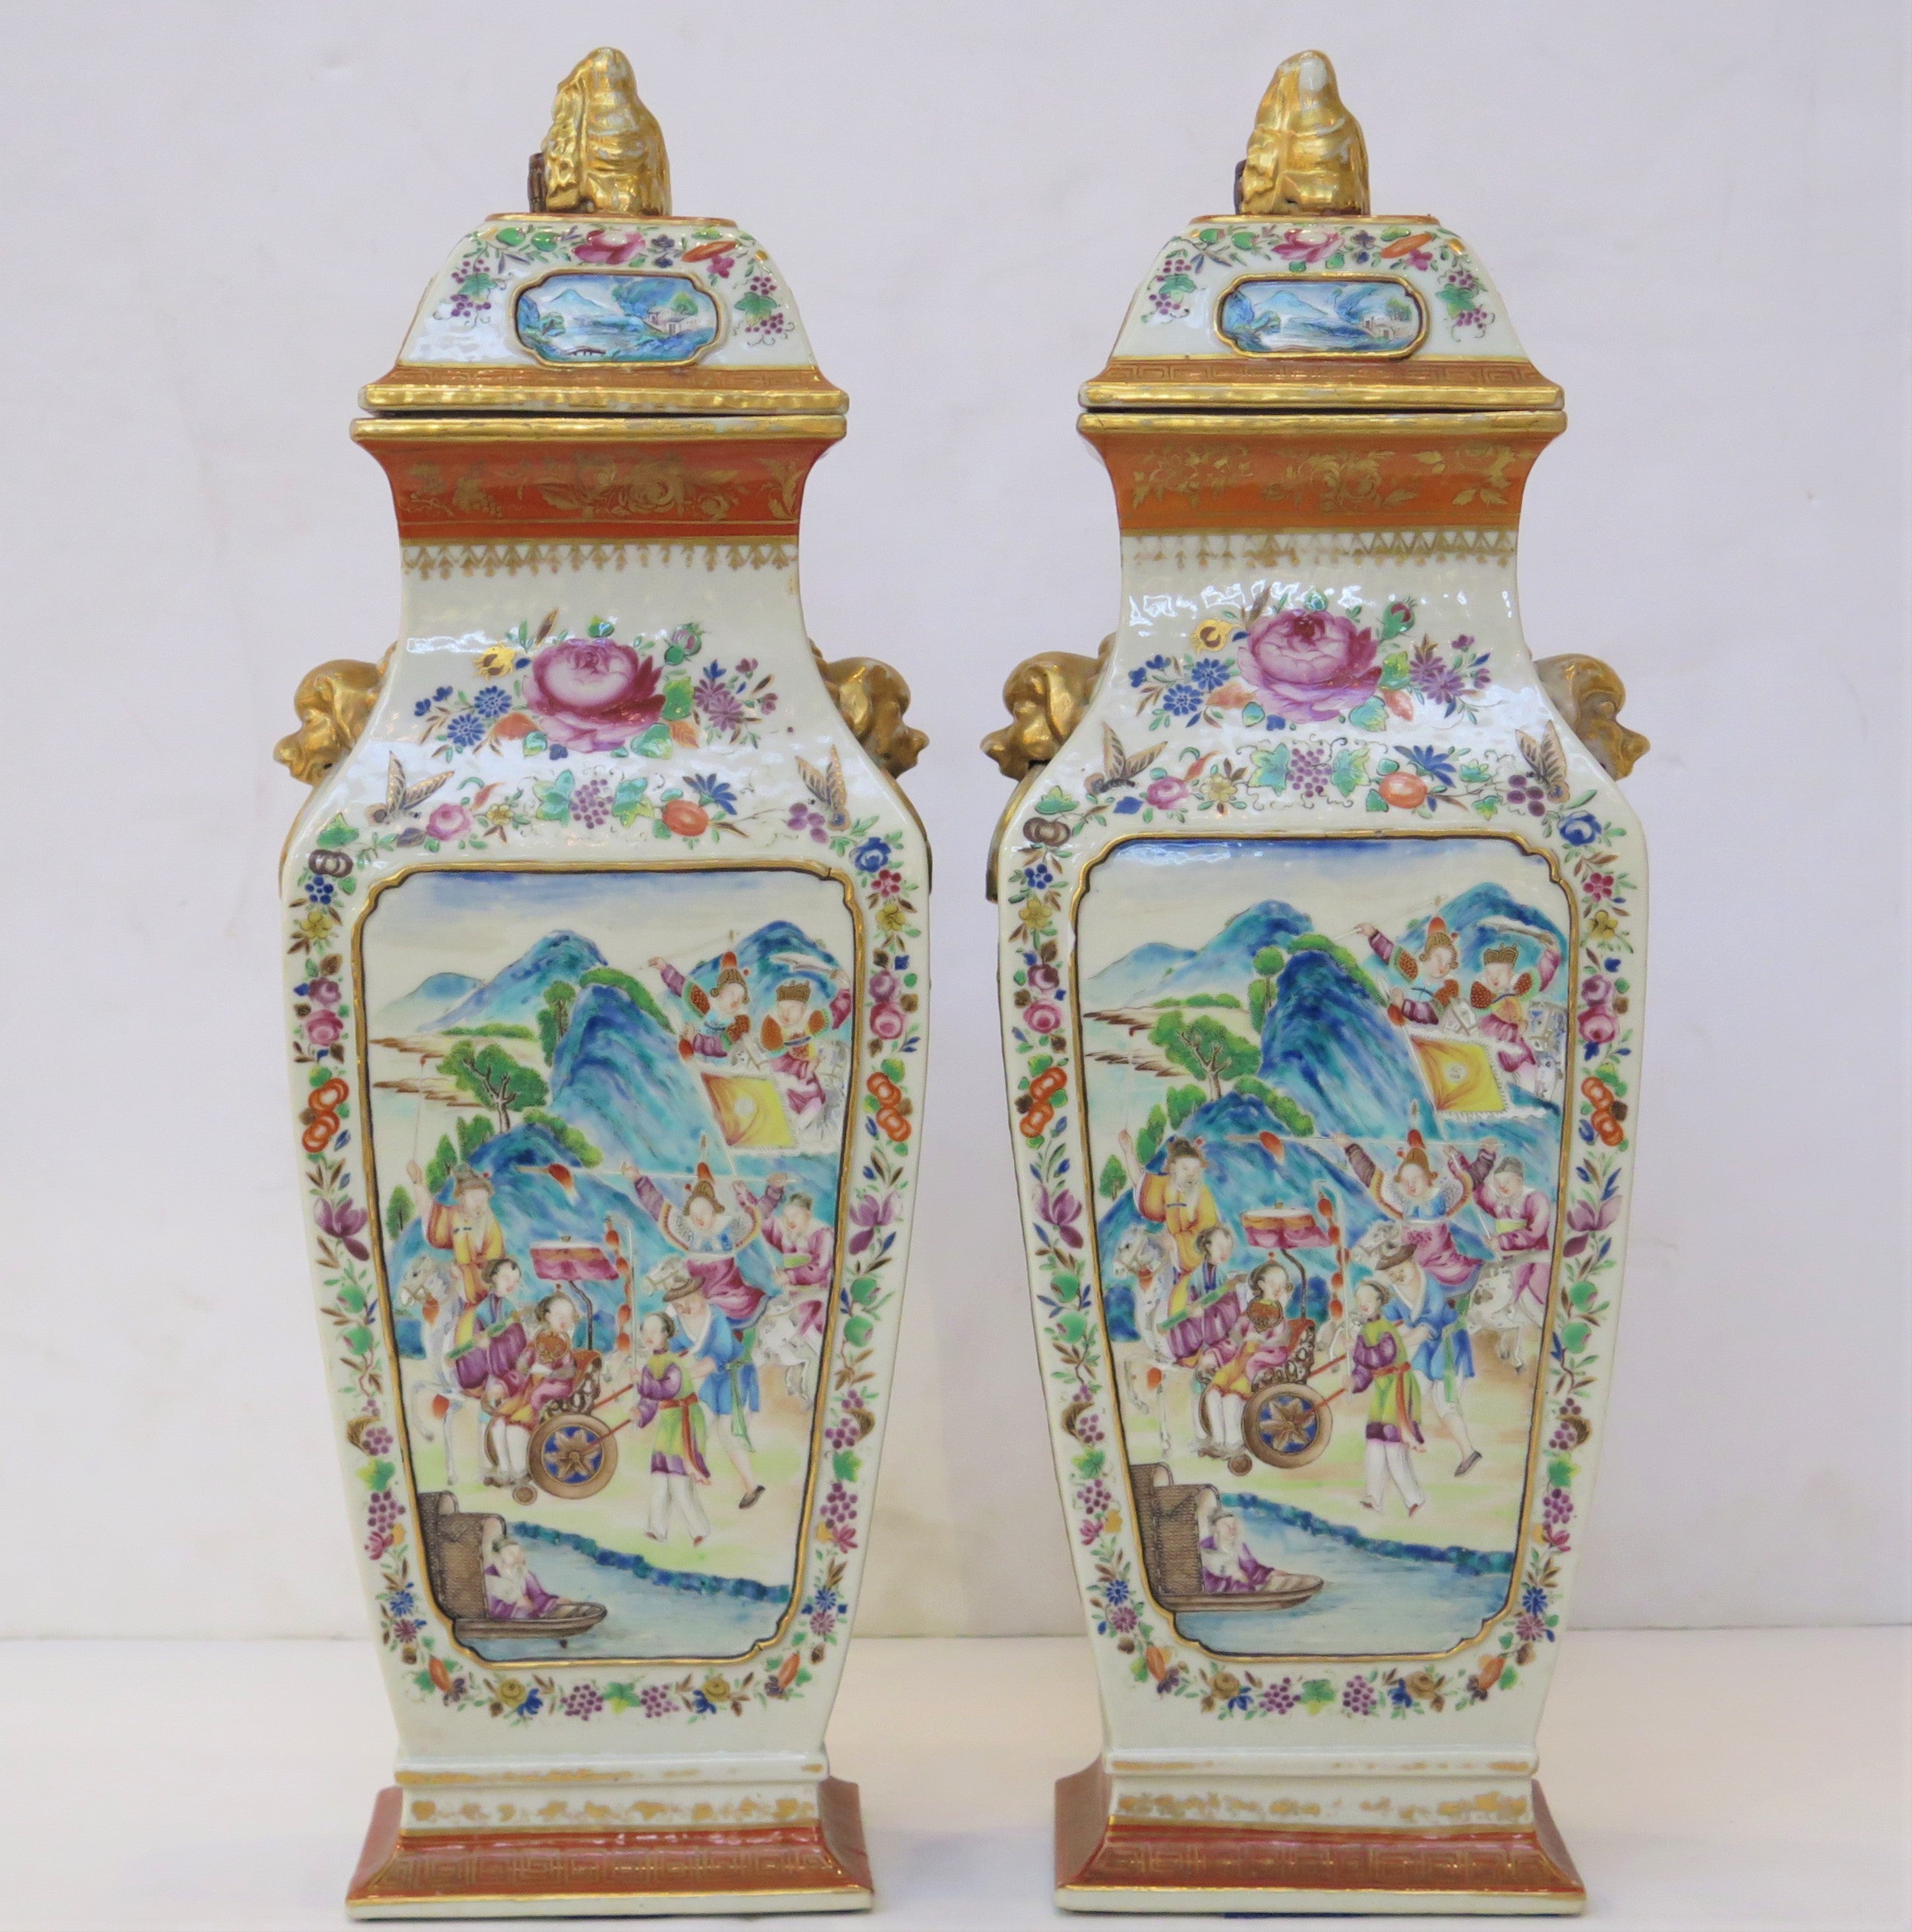 Very Good Quality Large Chinese Lidded Jars / PAIR